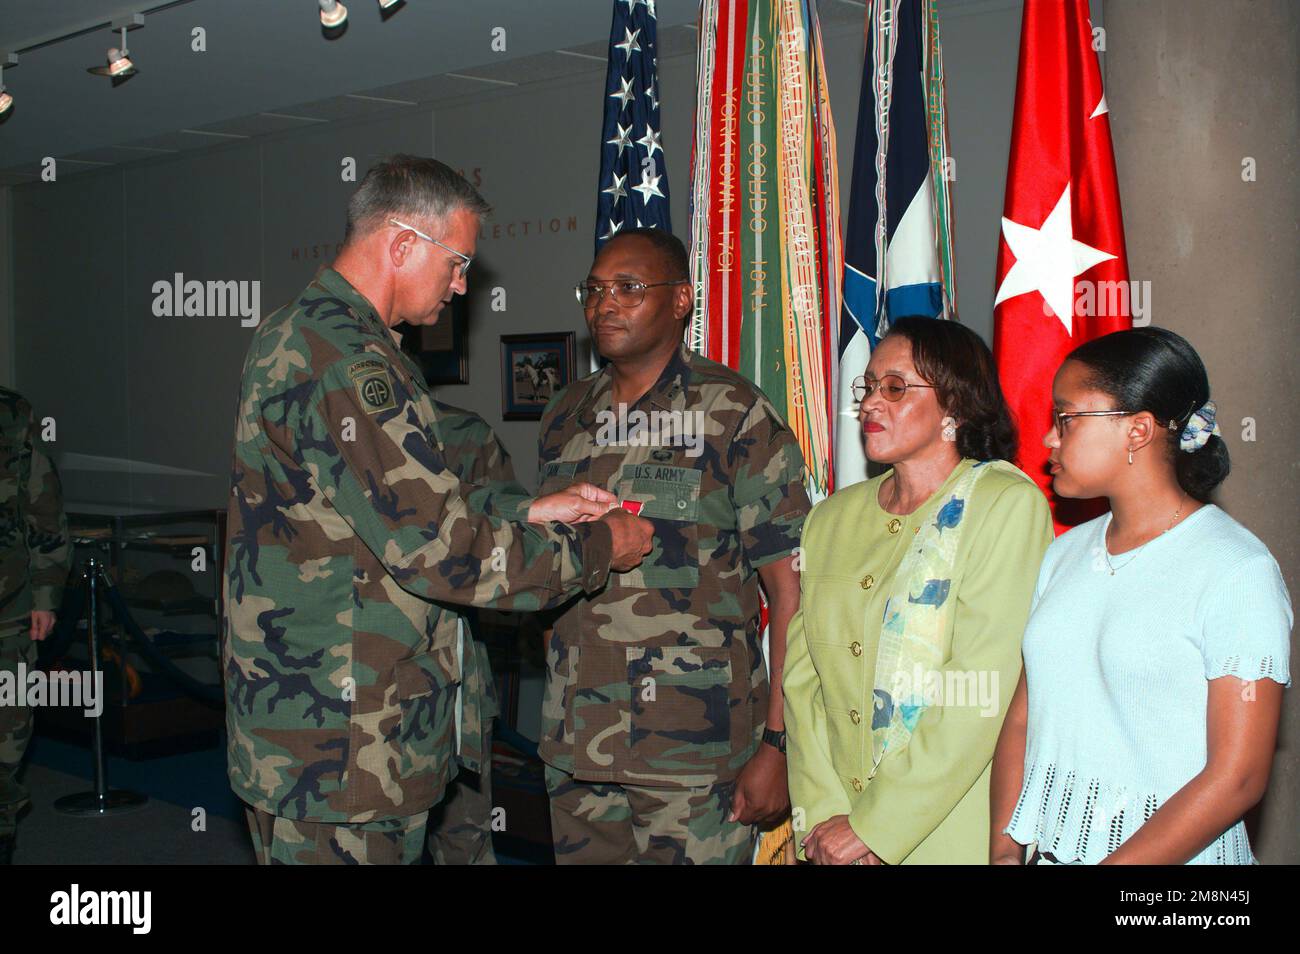 LTG Thomas A. Schwartz (left), Commanding General of III Corps and Fort Hood present the Legion of Merit medal to COL Eddie Cain for his exceptionally meritorious service while assigned as chemical officer, III Corps and Fort Hood. Looking on are the colonel's wife Fredia (second from right) and his daughter Trina (right). Base: Fort Hood State: Texas (TX) Country: United States Of America (USA) Stock Photo